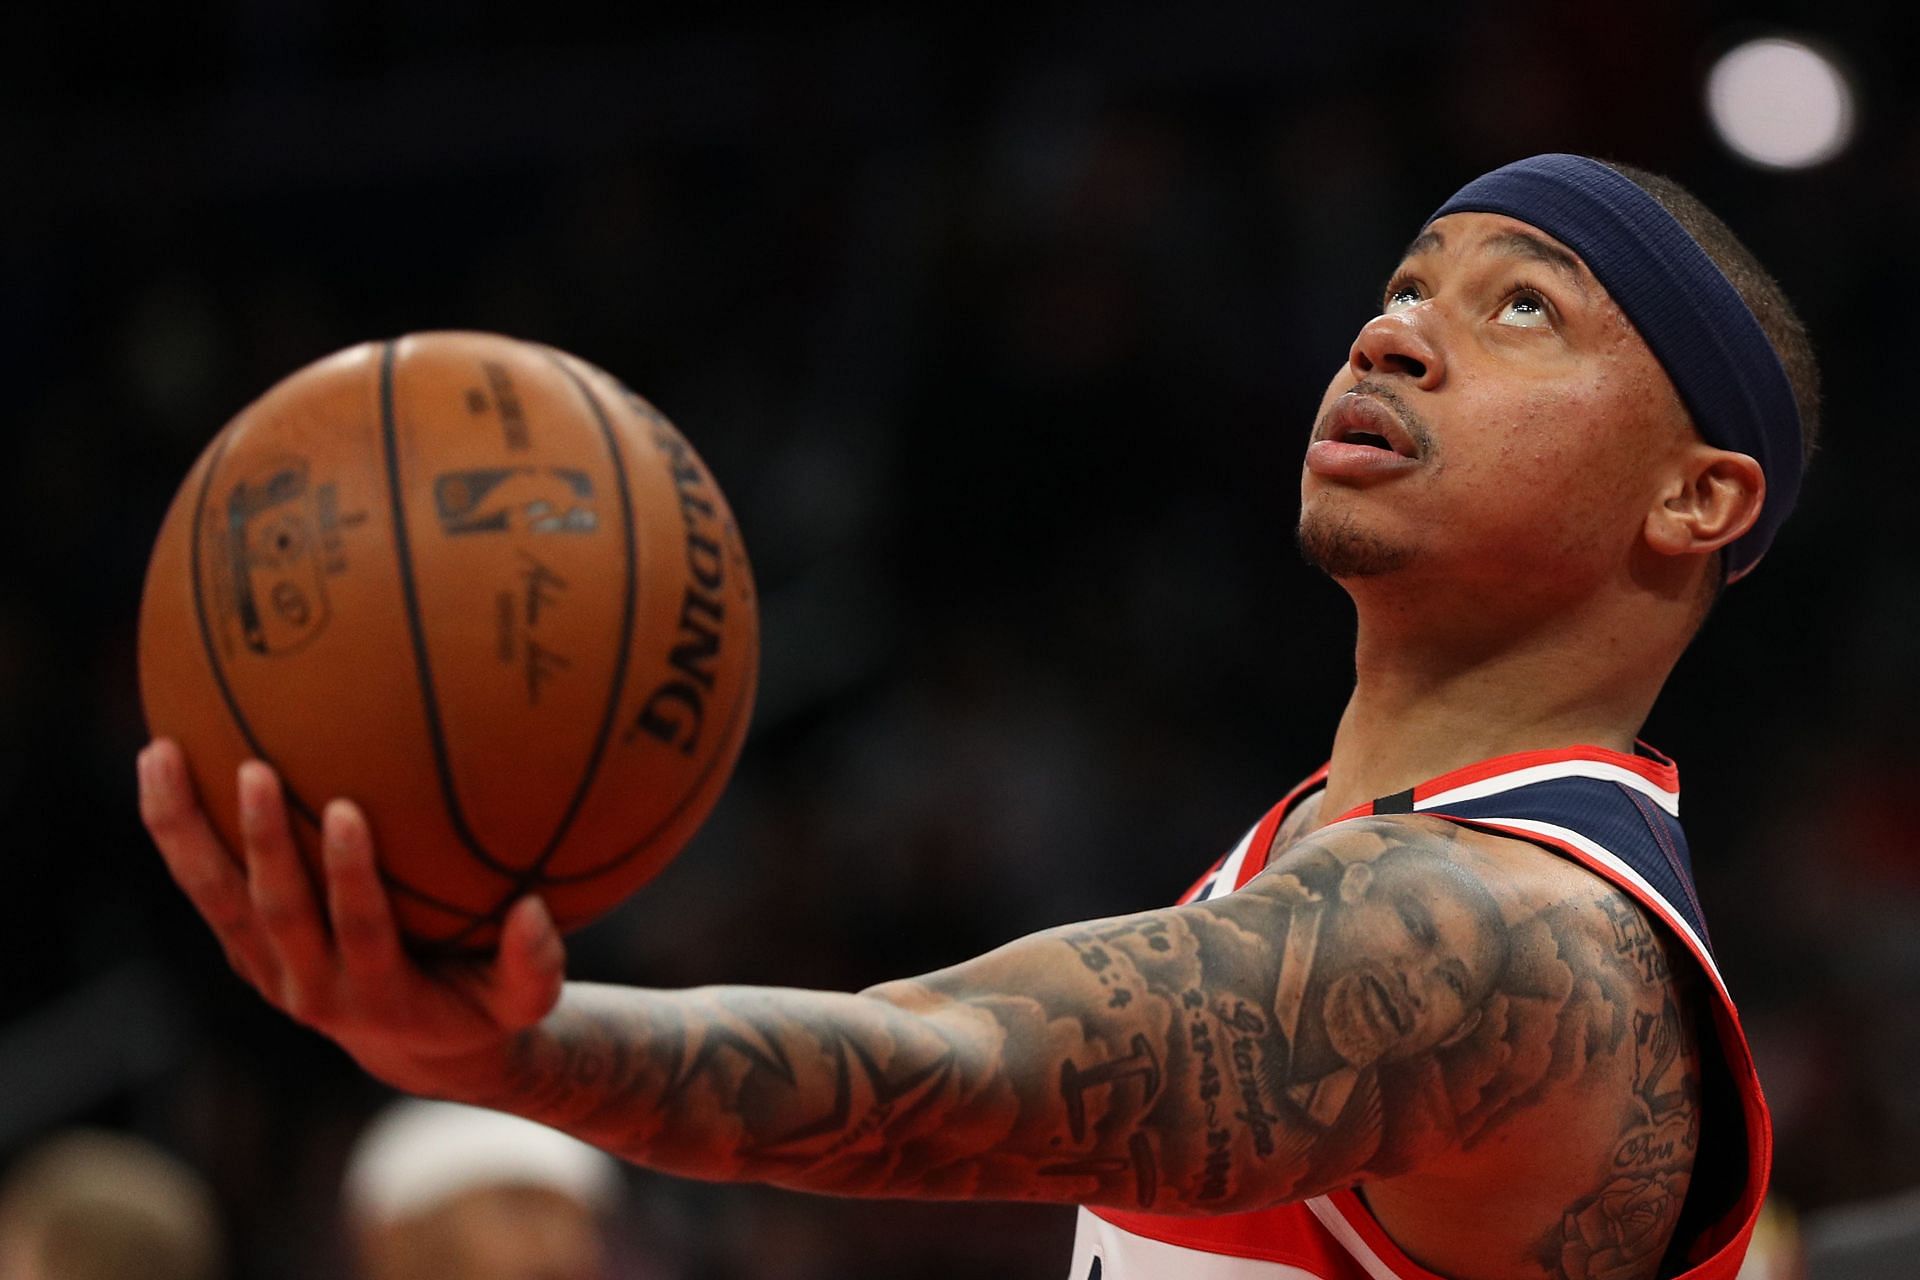 Isaiah Thomas during his tenure with the Washington Wizards